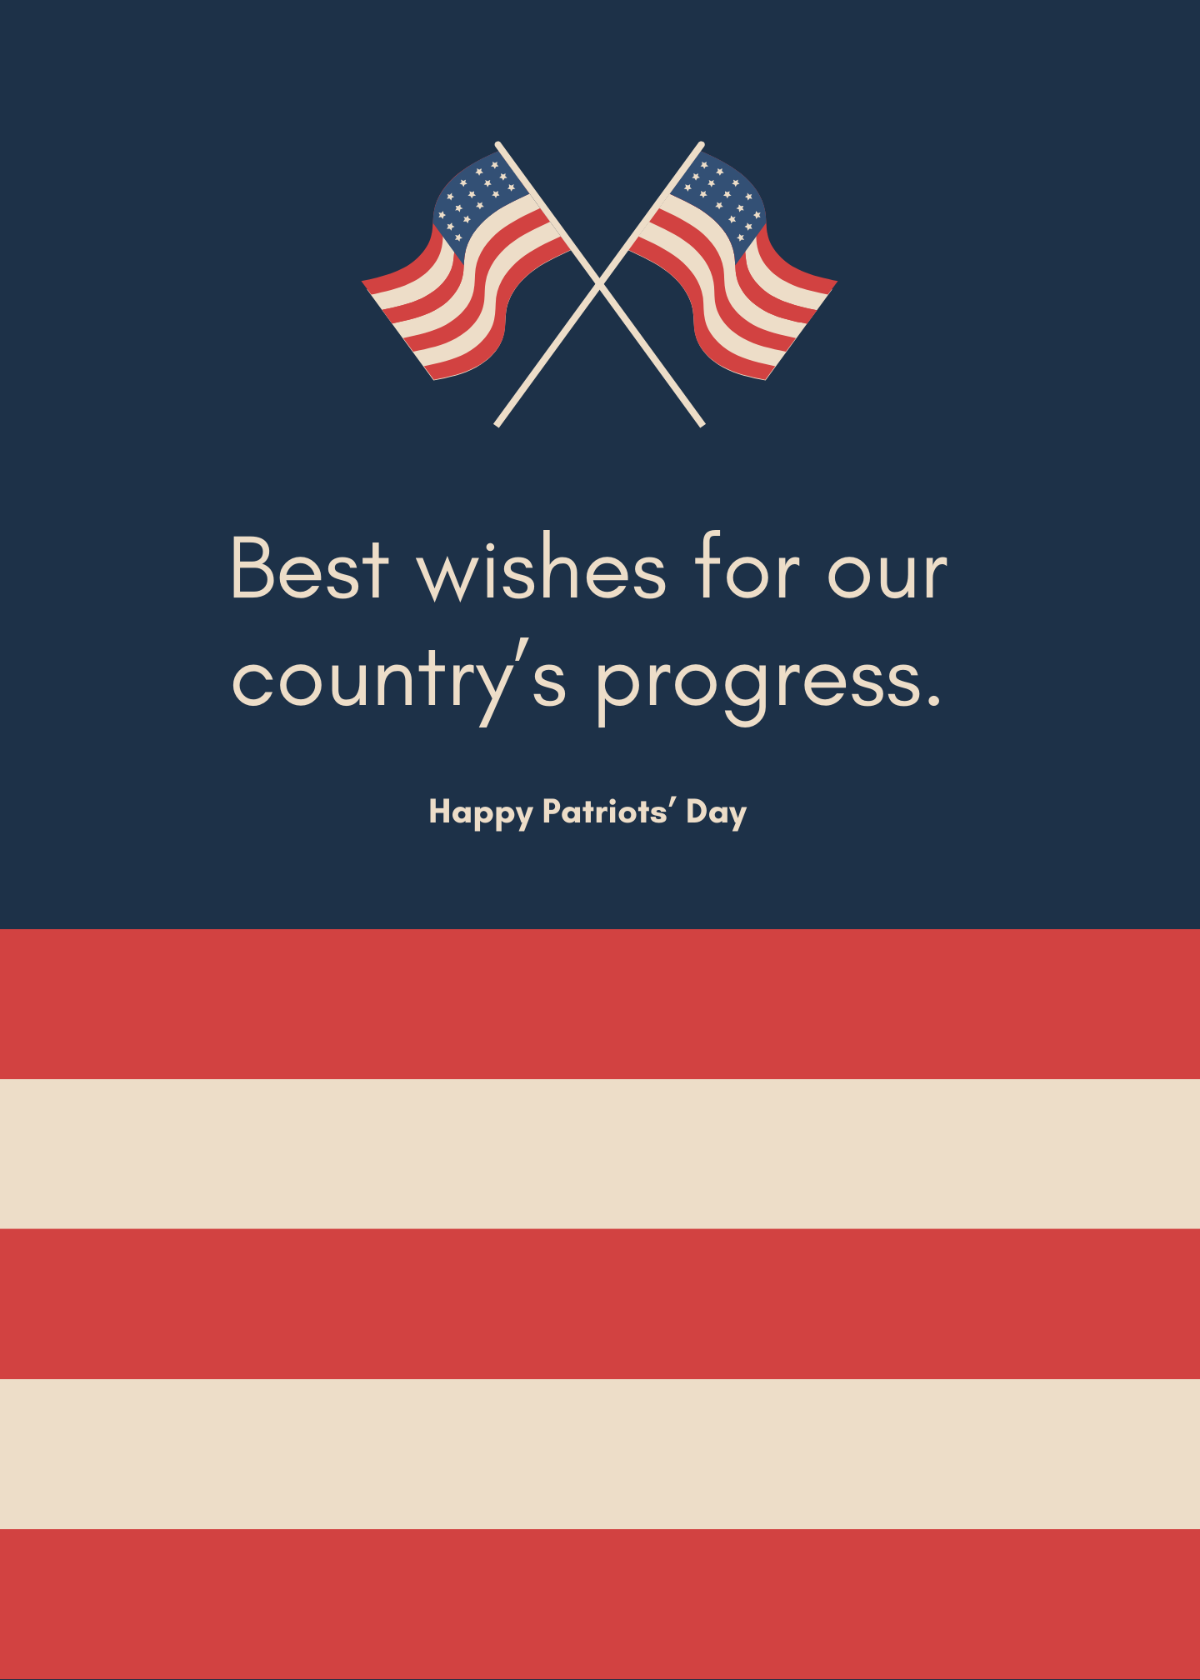 Patriots' Day Best Wishes Template